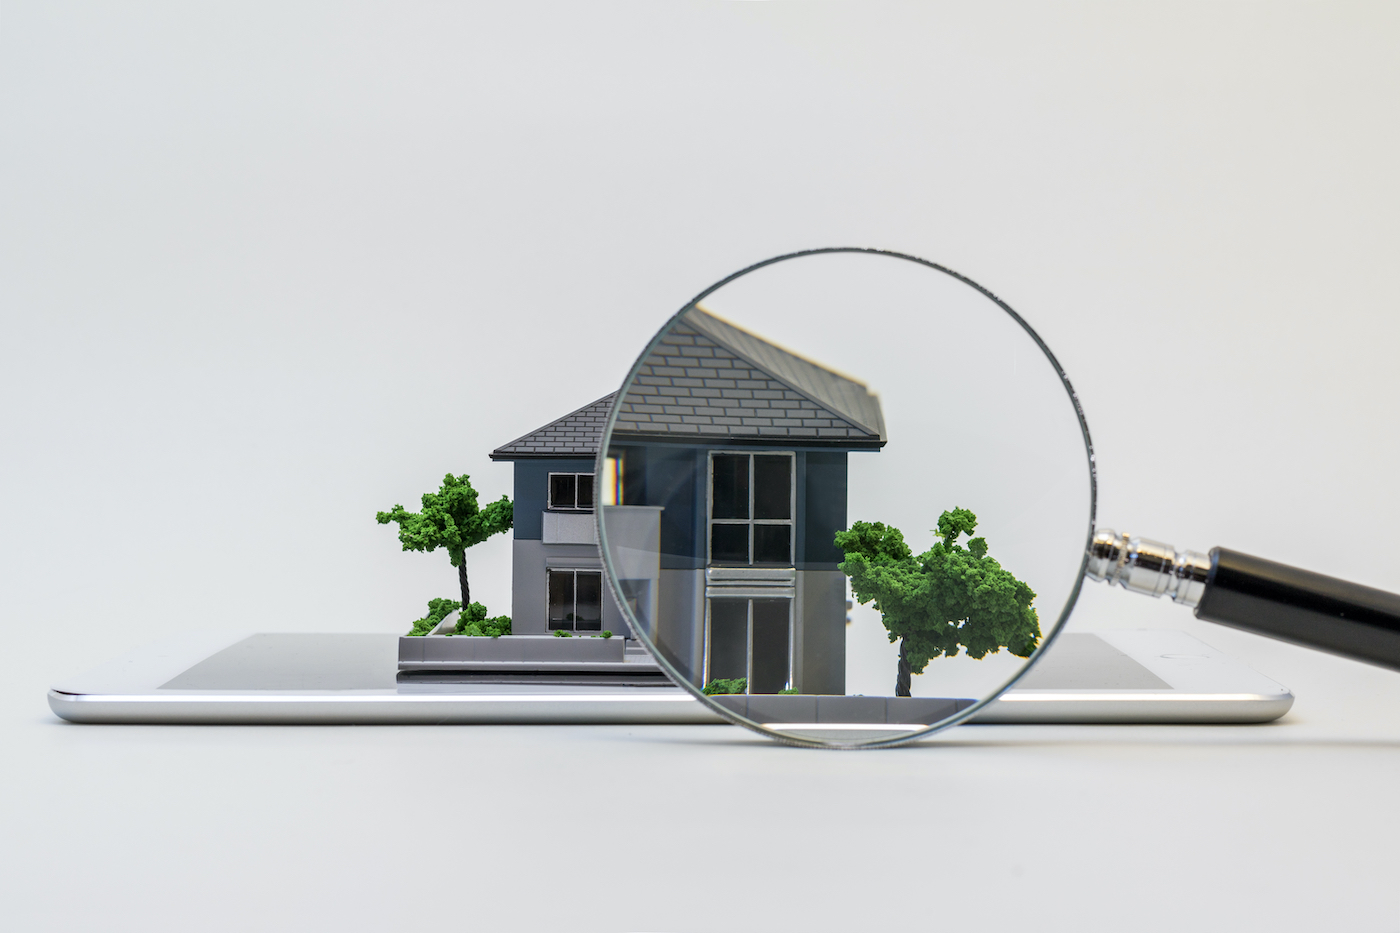 magnifying glass held up to the roof on a miniature home model to inspect it